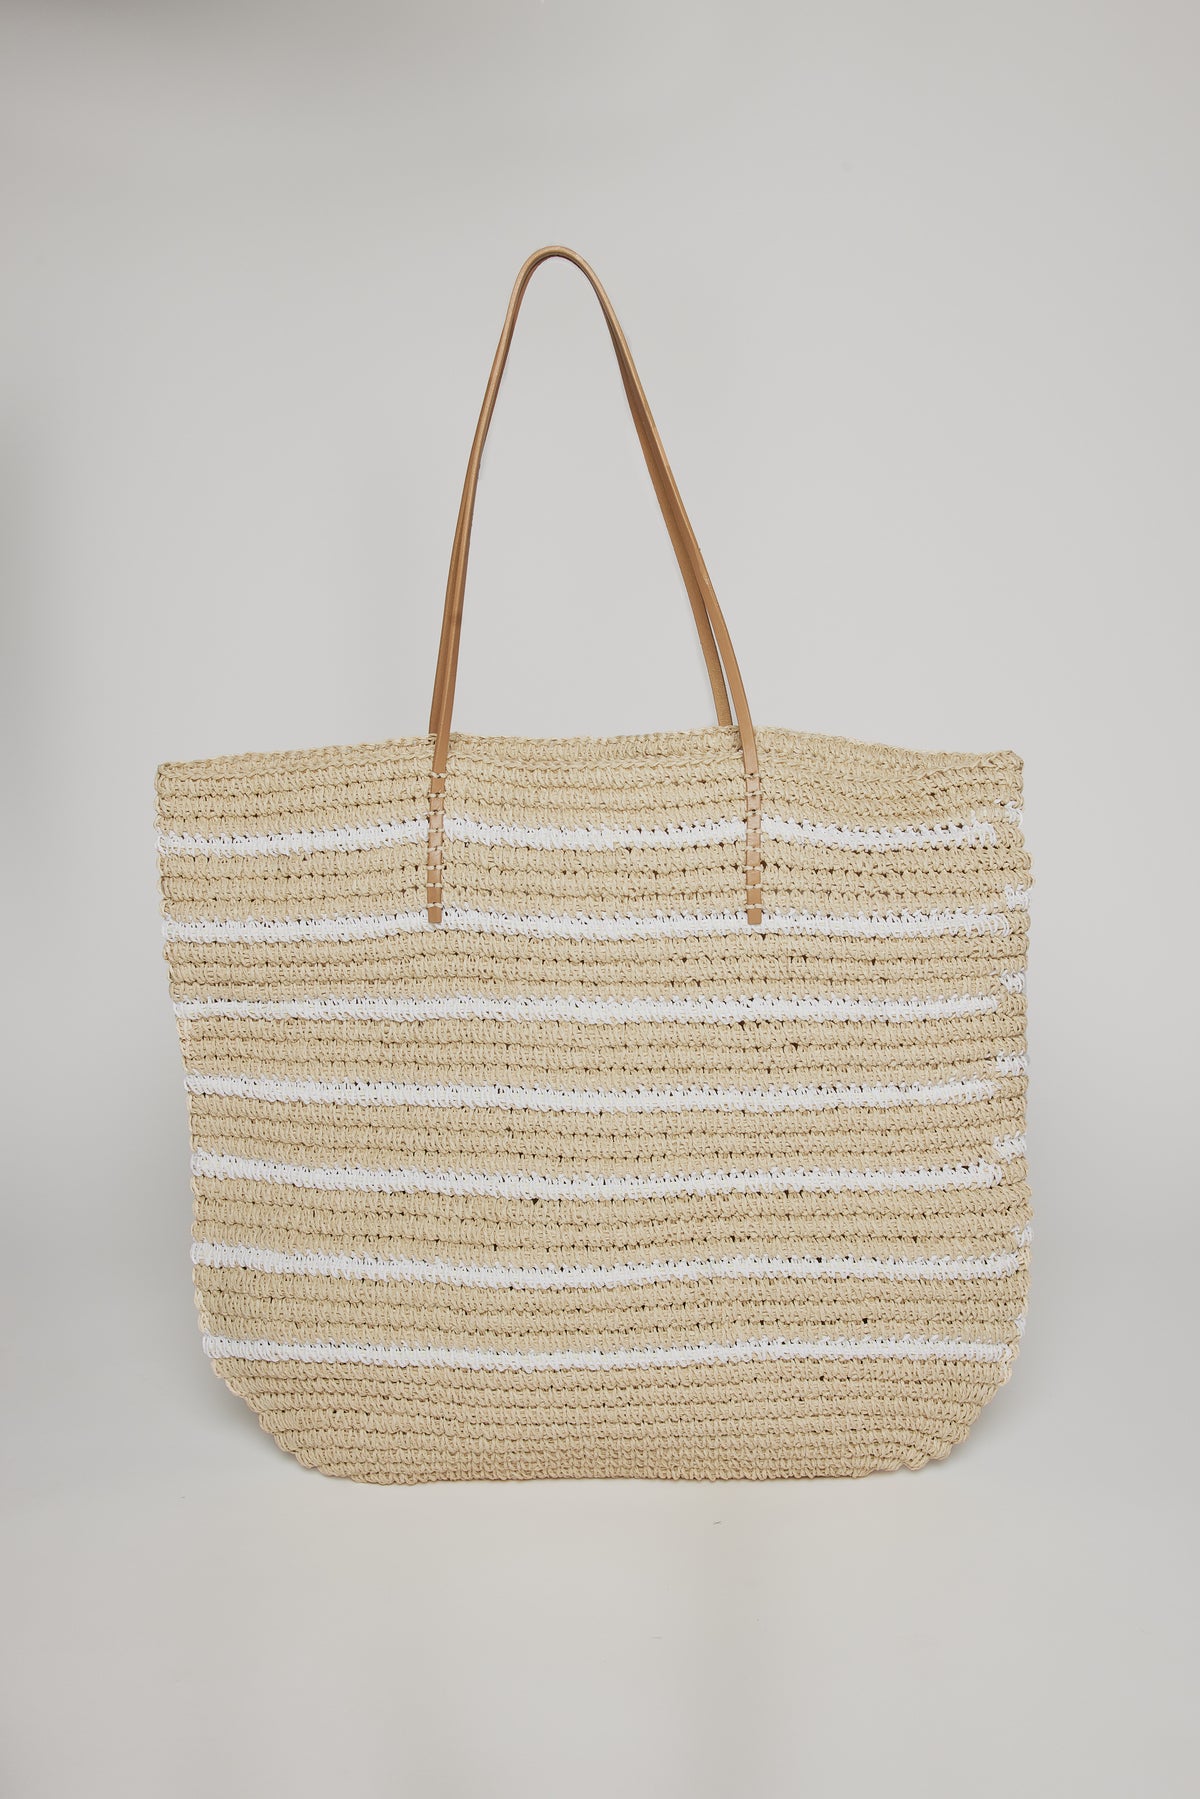 A large STELLA STRIPE TOTE by Velvet by Graham & Spencer, with beige and white stripes, featuring long leather handles, displayed against a plain background.-36289699086529